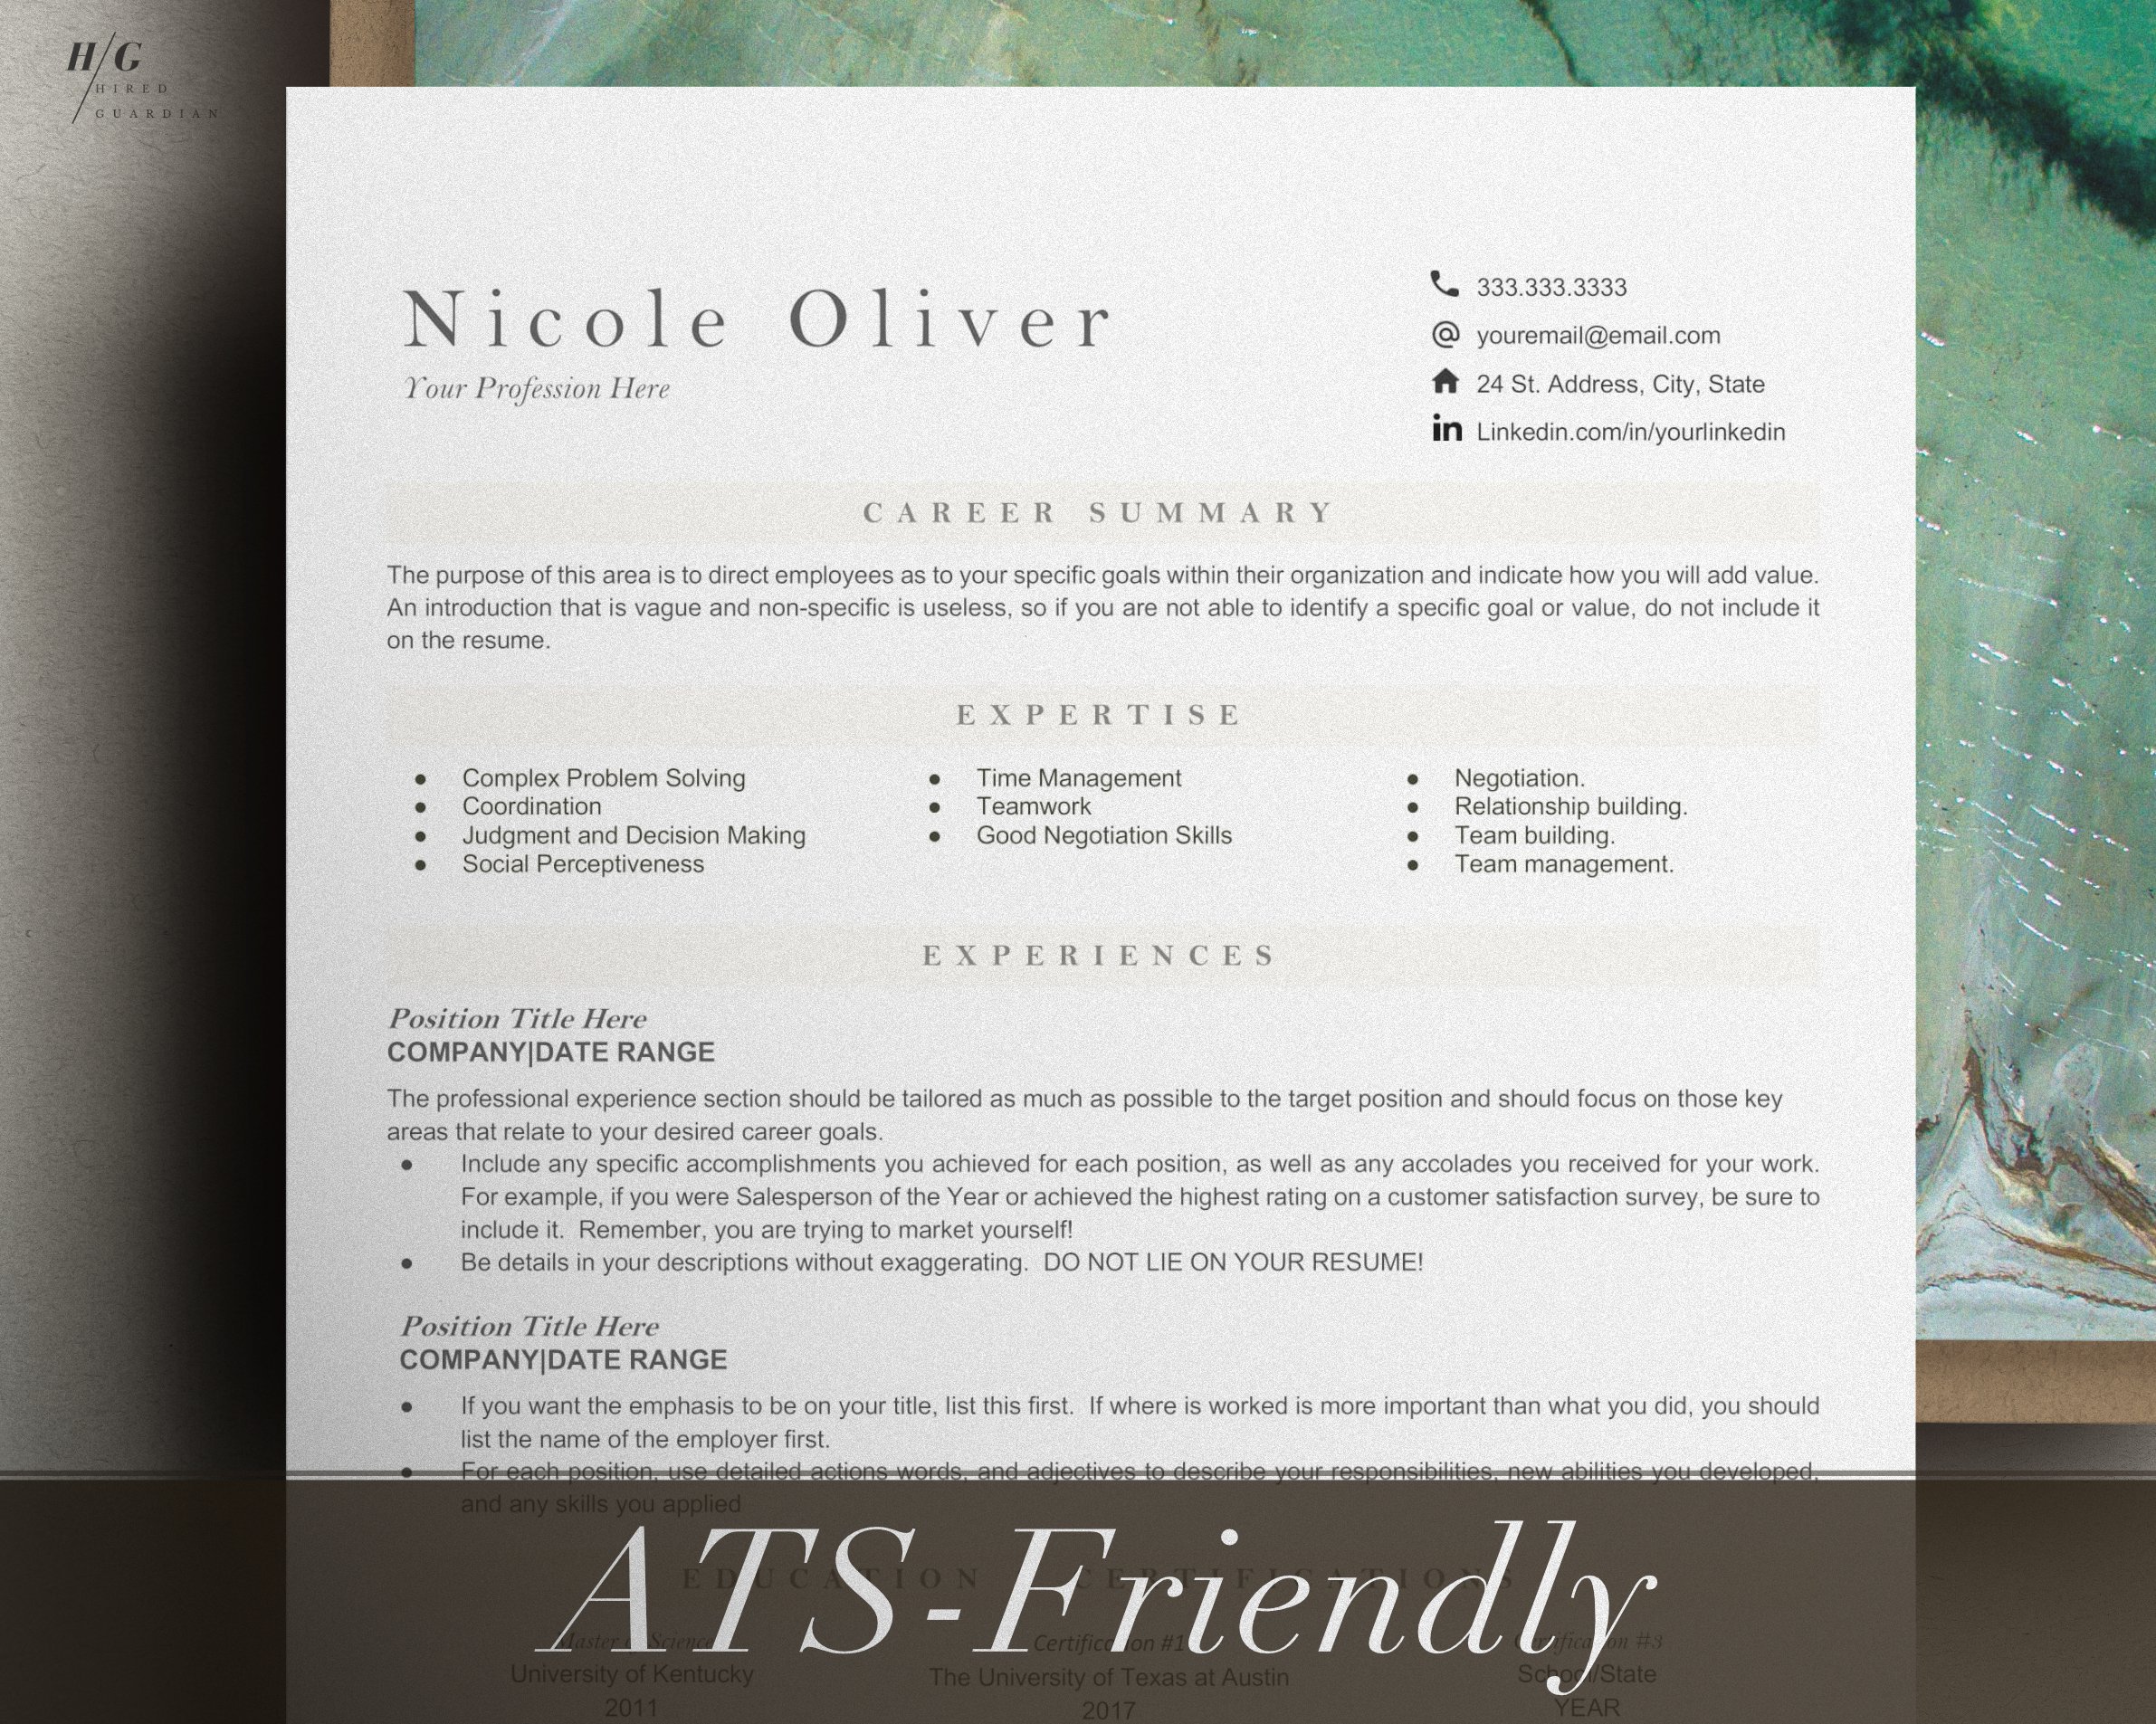 ATS Resume Template - Nicole cover image.